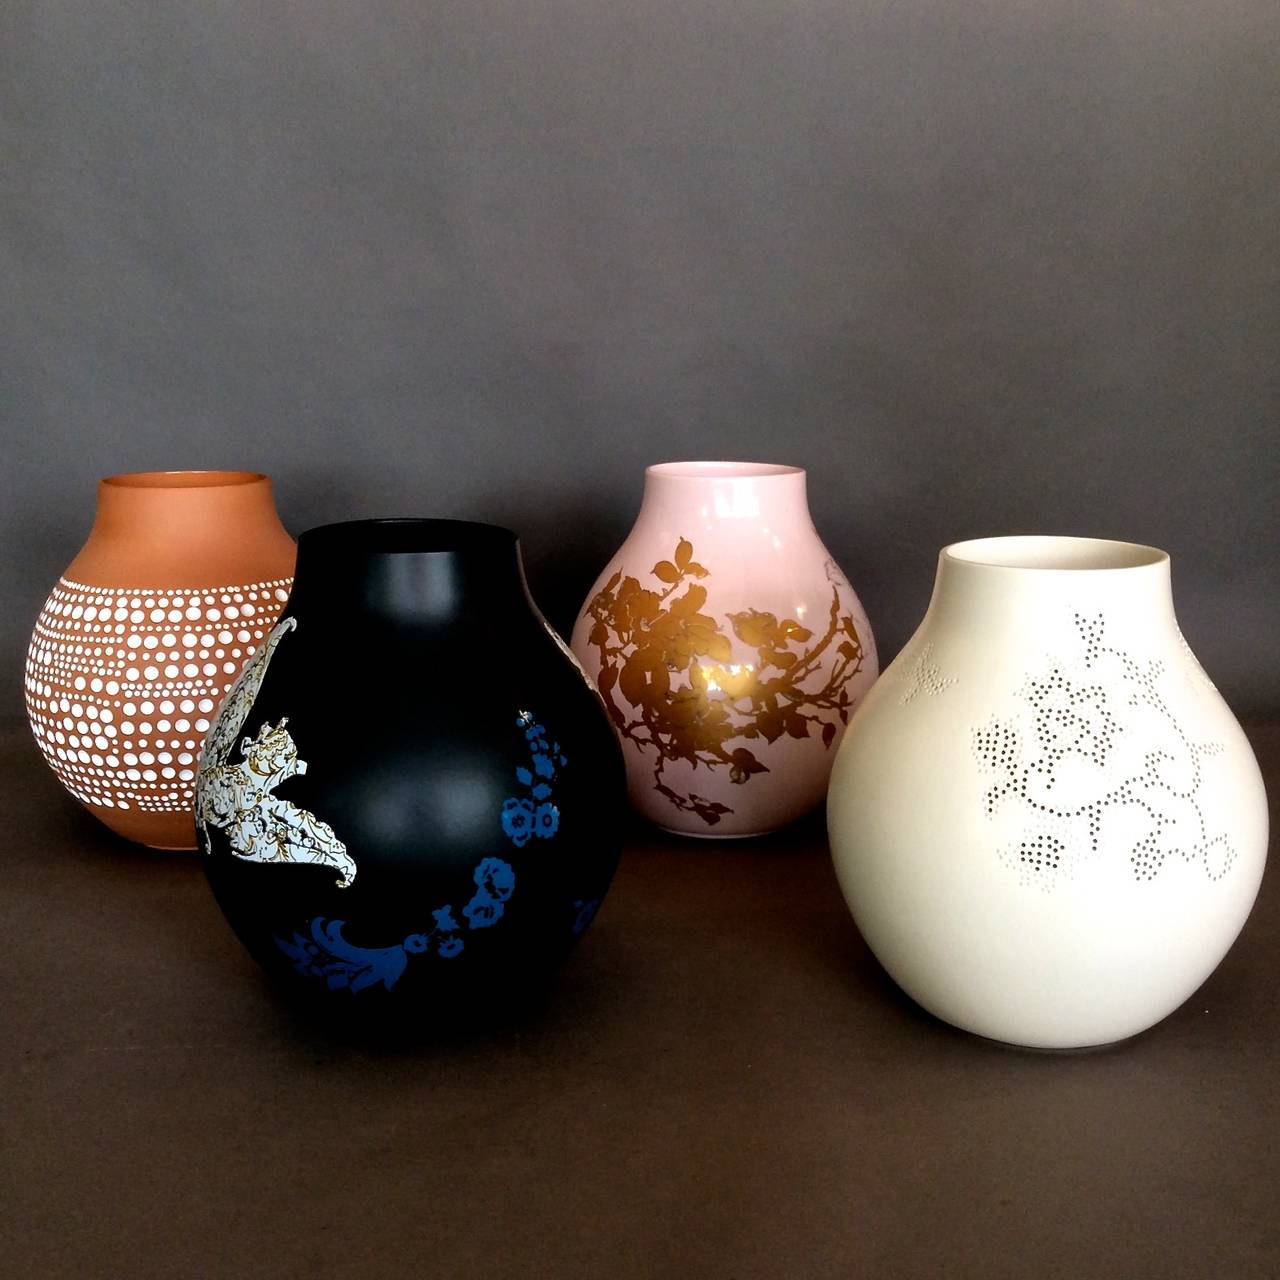 The complete set of four ceramic vases, two of them incised, designed in 2005 by Hella Jongerius for Ikea. Out of production.

WEEKLY DELIVERIES TO MANHATTAN FOR APPROVAL OR SALES. STANDARD DELIVERY FEE IS $150.